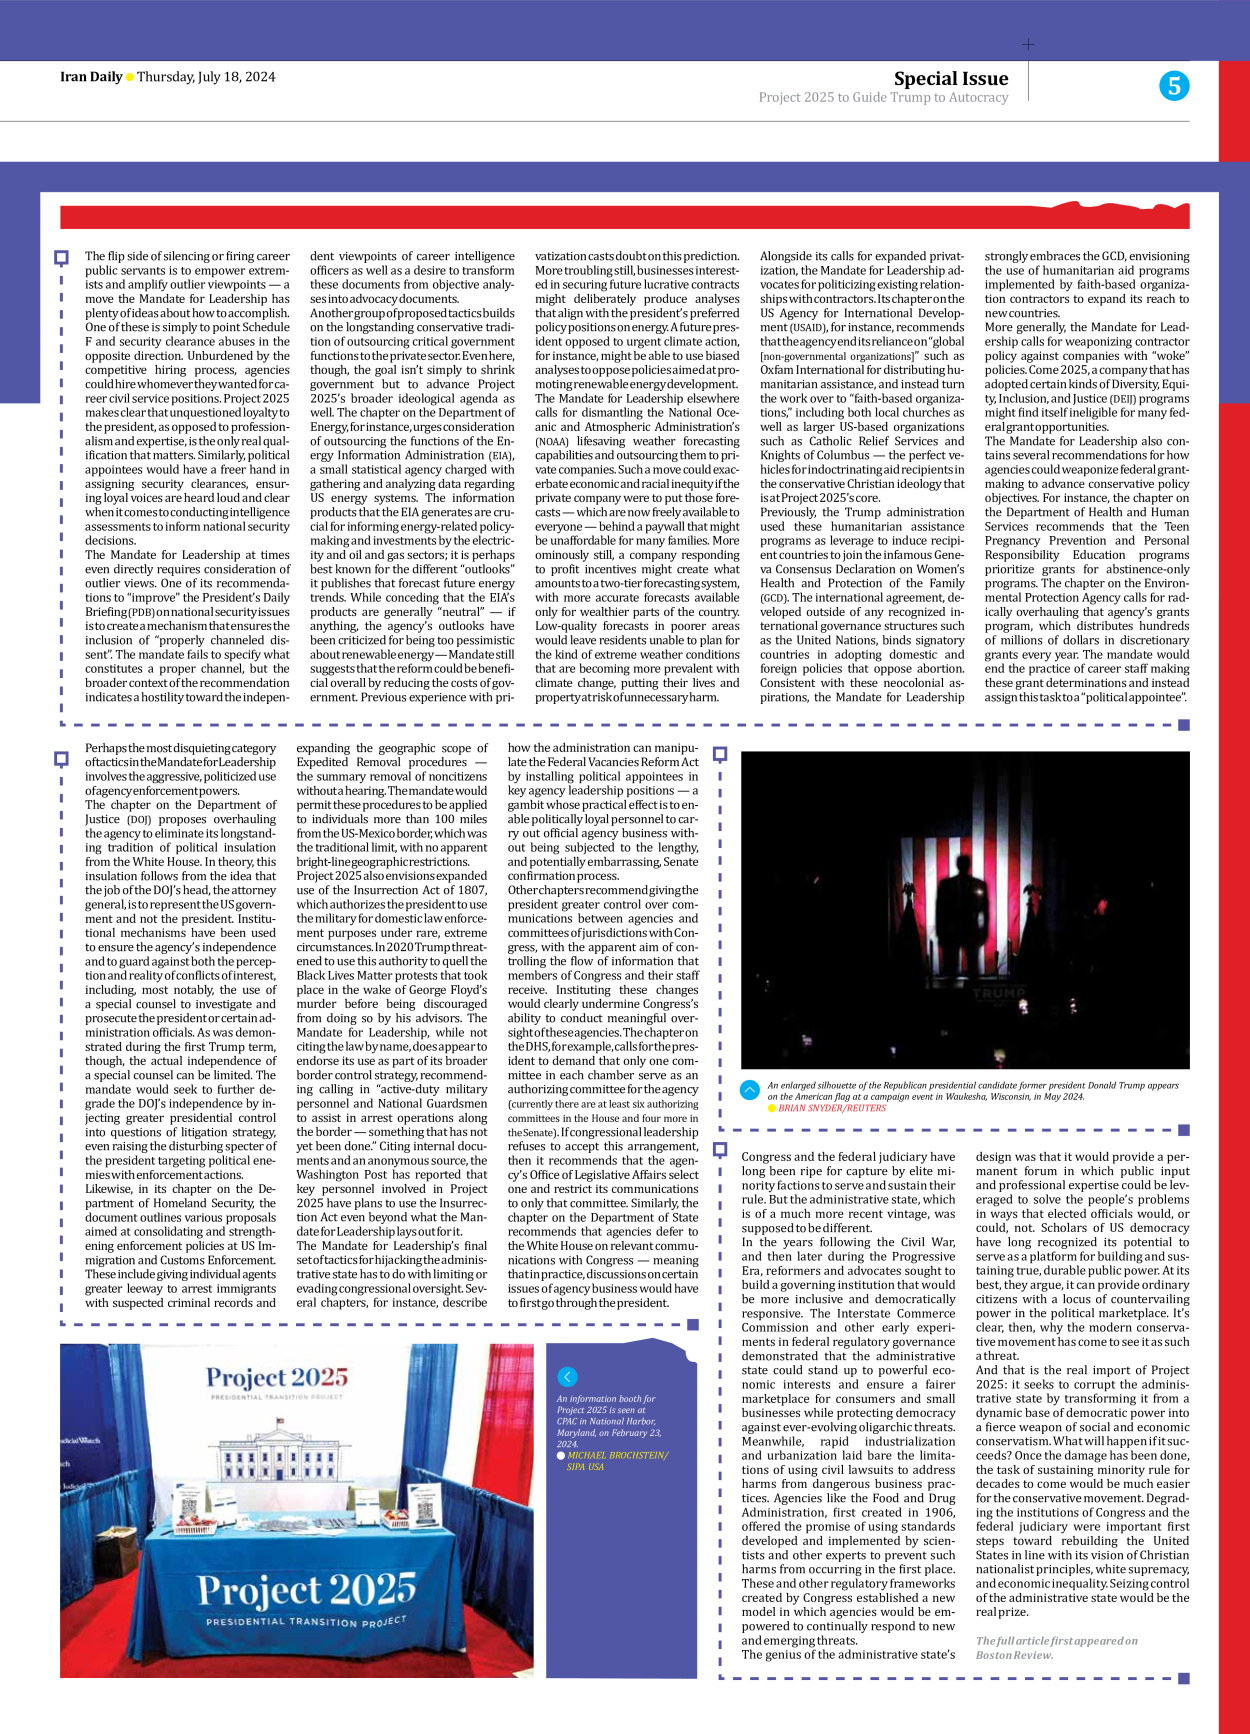 Iran Daily - Number Seven Thousand Six Hundred and Six - 18 July 2024 - Page 5